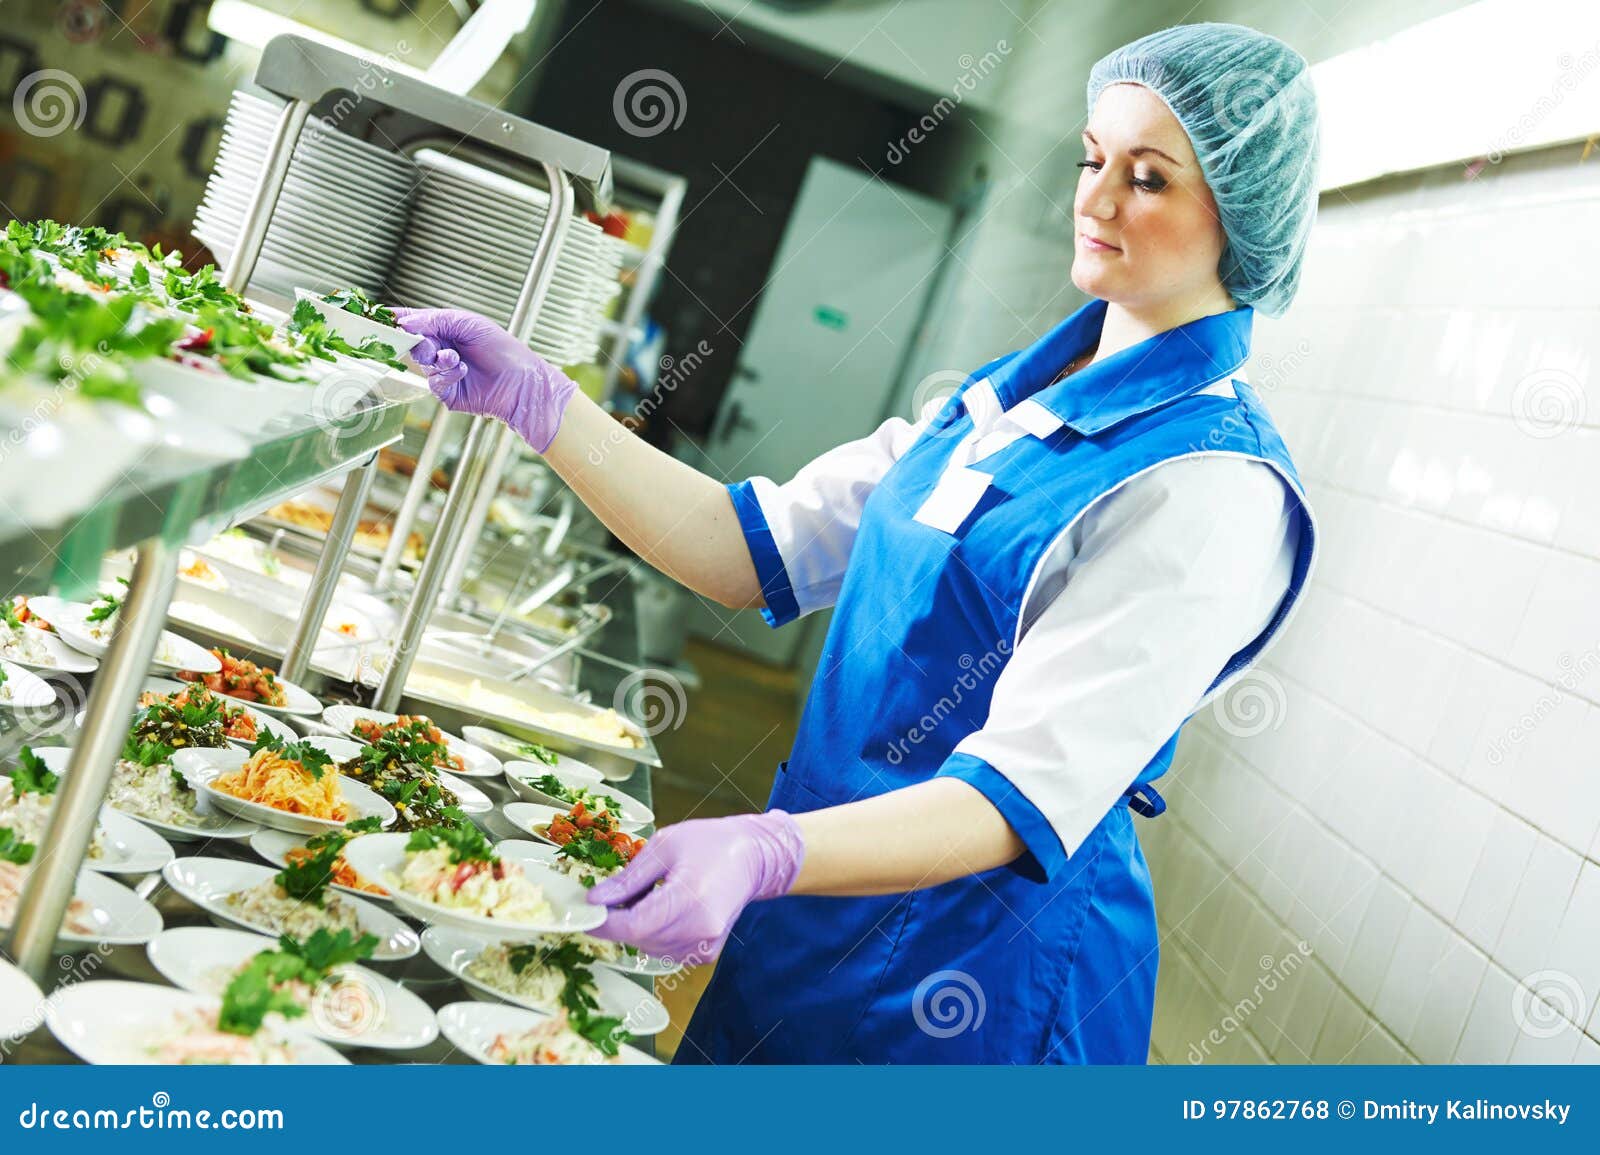 Buffet Female Worker Servicing Food in Cafeteria Stock Photo - Image of  preparation, education: 97862768